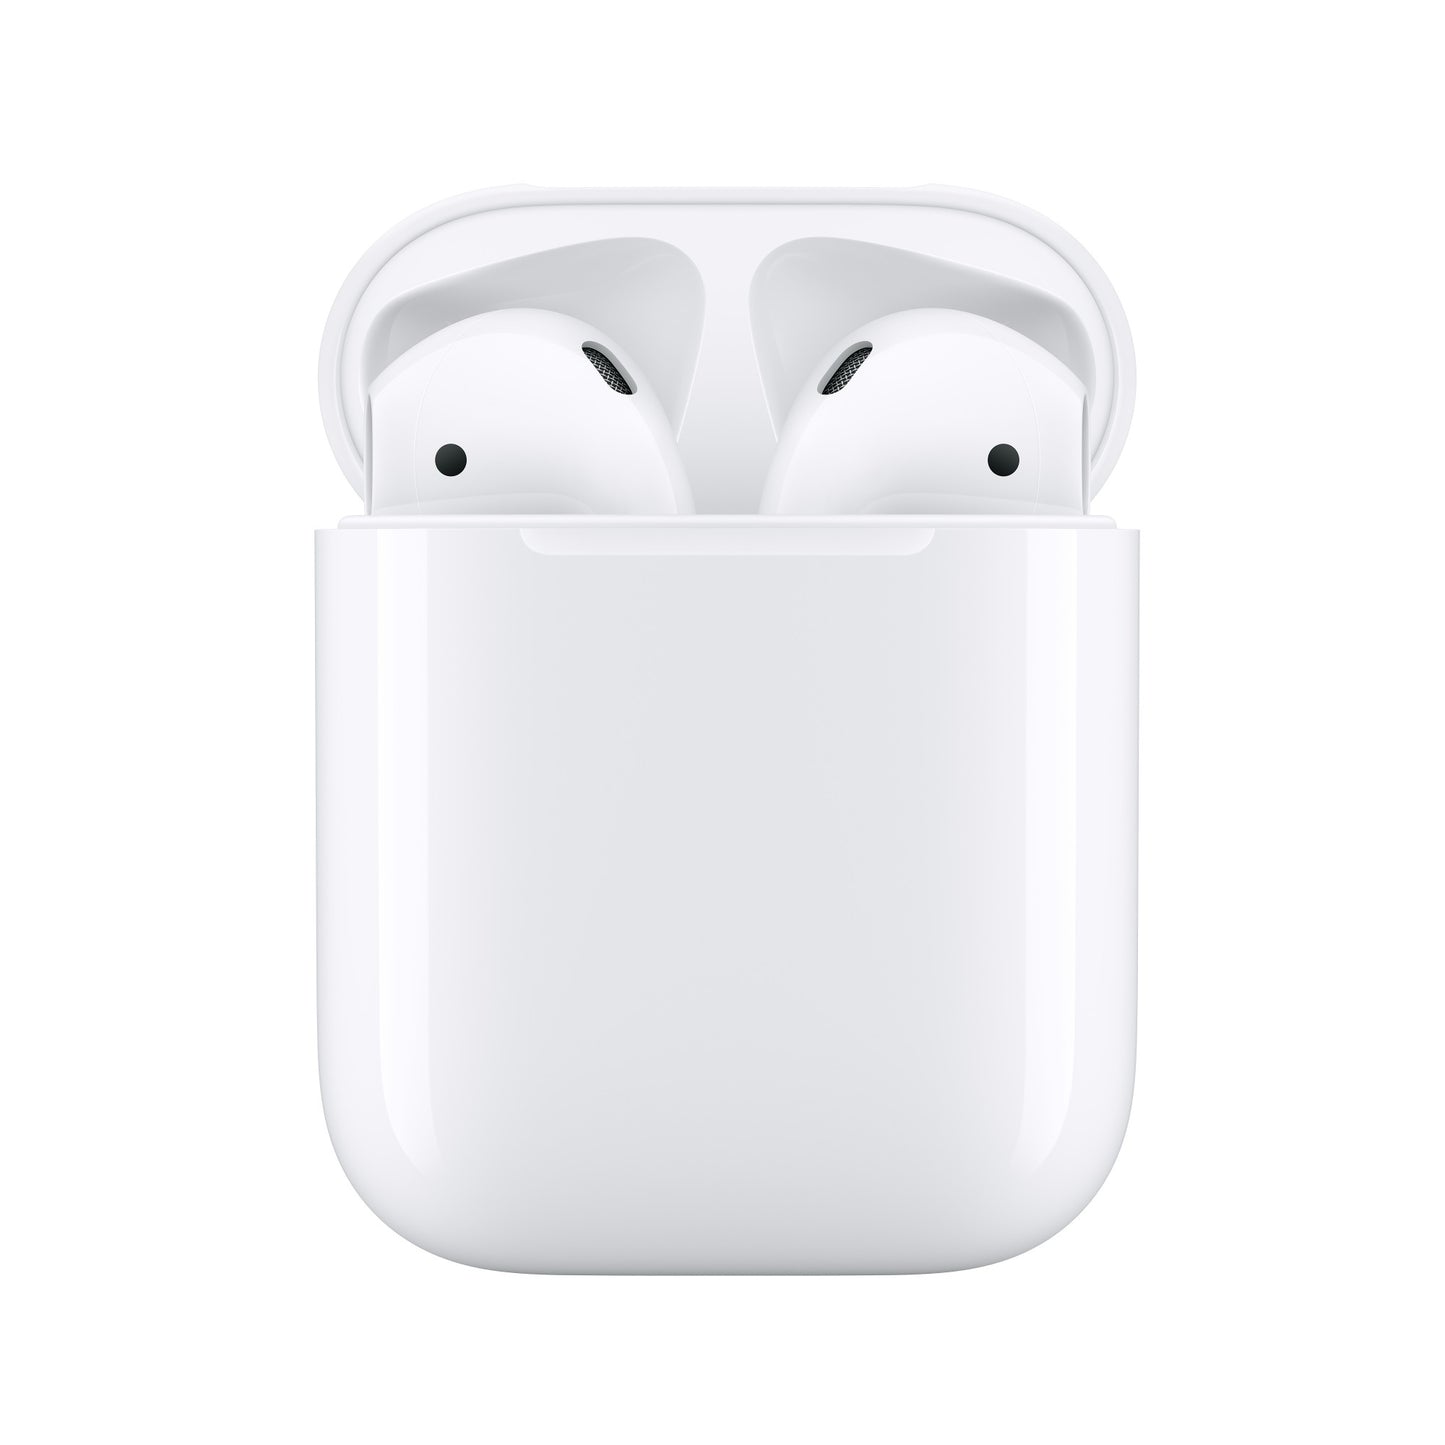 Apple AirPods (2nd generation) AirPods Headset True Wireless Stereo (TWS) In-ear Calls/Music Bluetooth White